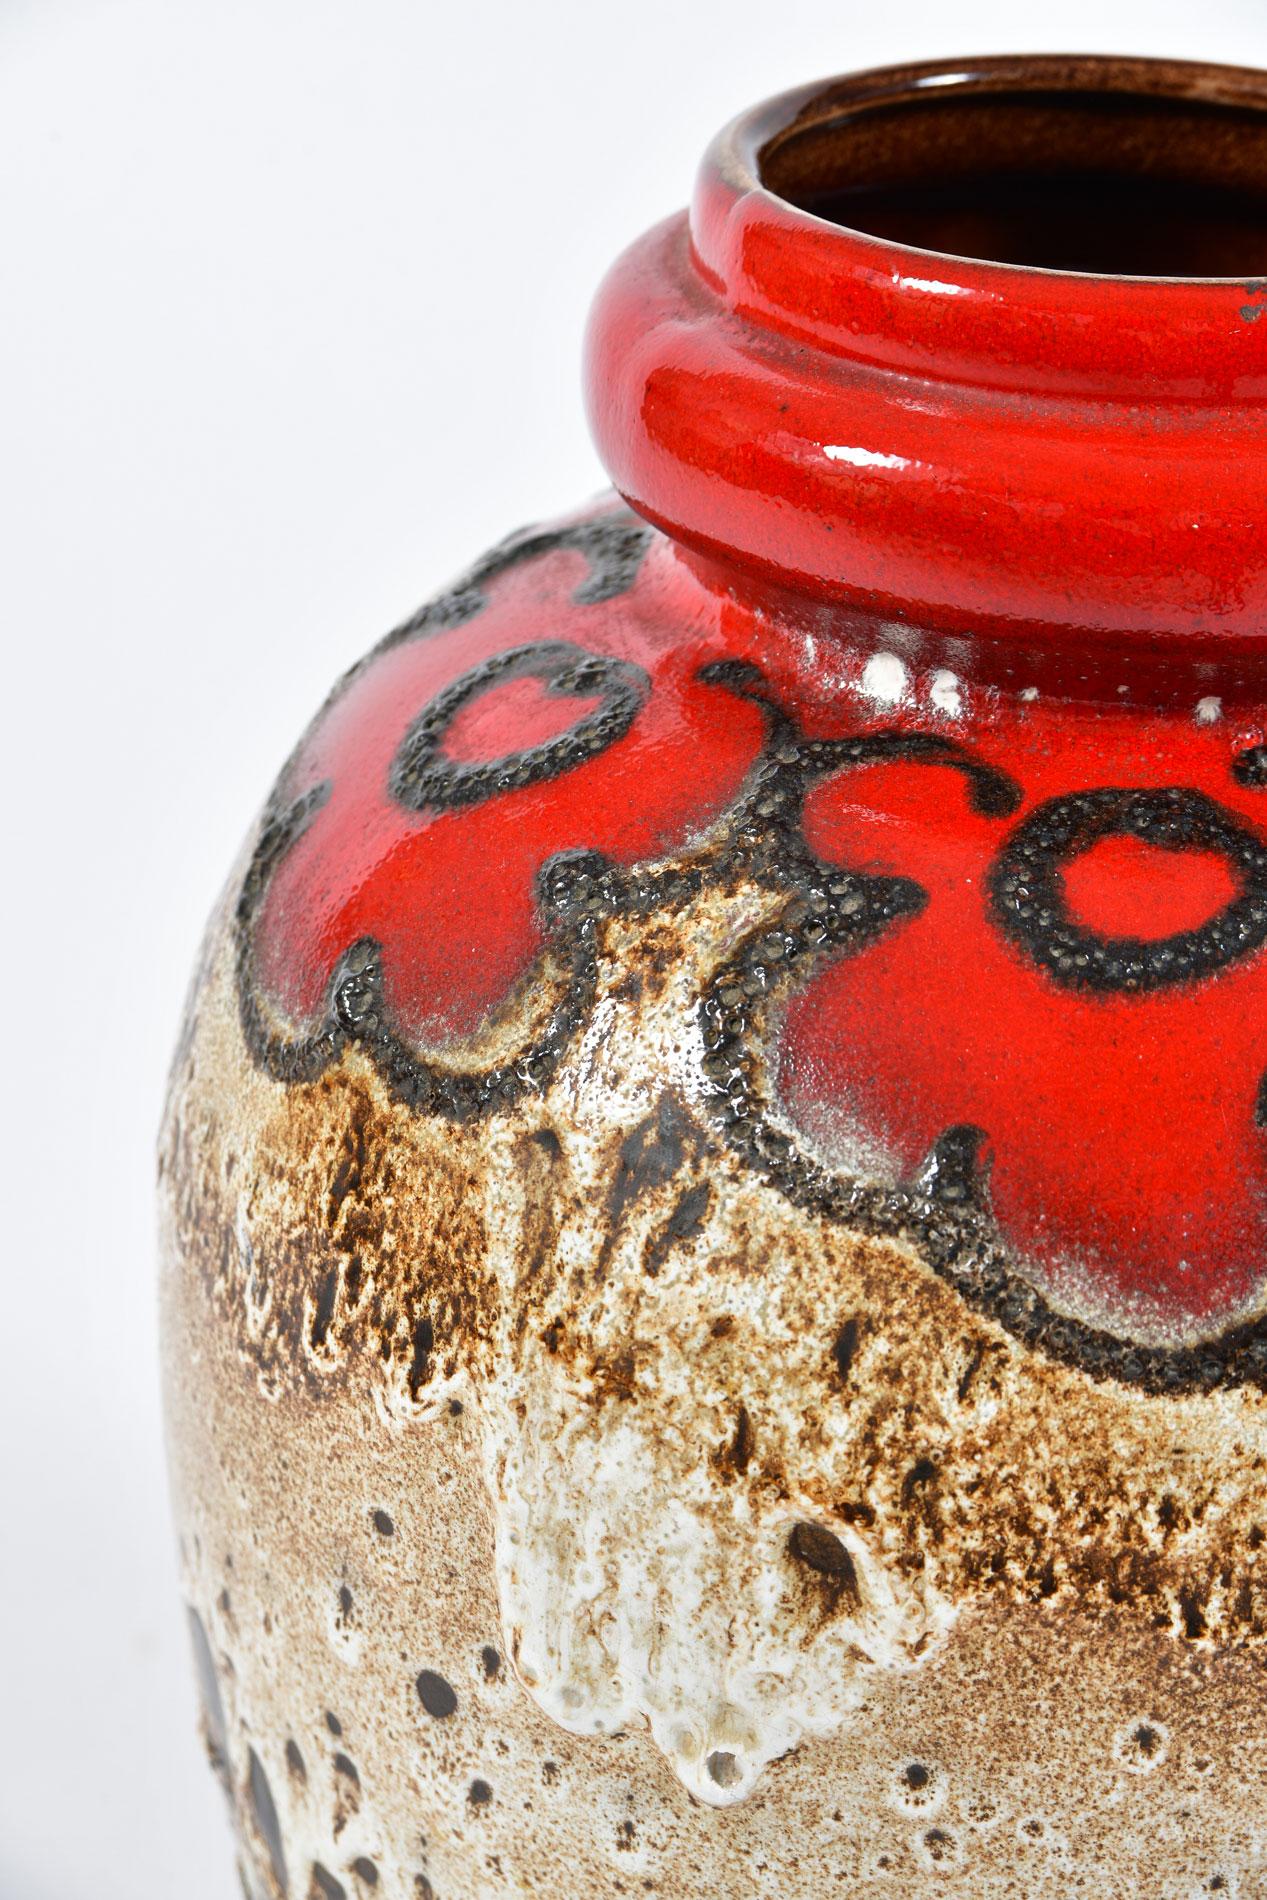 Ceramic fat lava optic pottery in rich red, cream and brown colouring with flower patterning. Marked to the base with ‘Made in West Germany’ and the vase series number 286-42. The 43 cm version is the largest of this series.